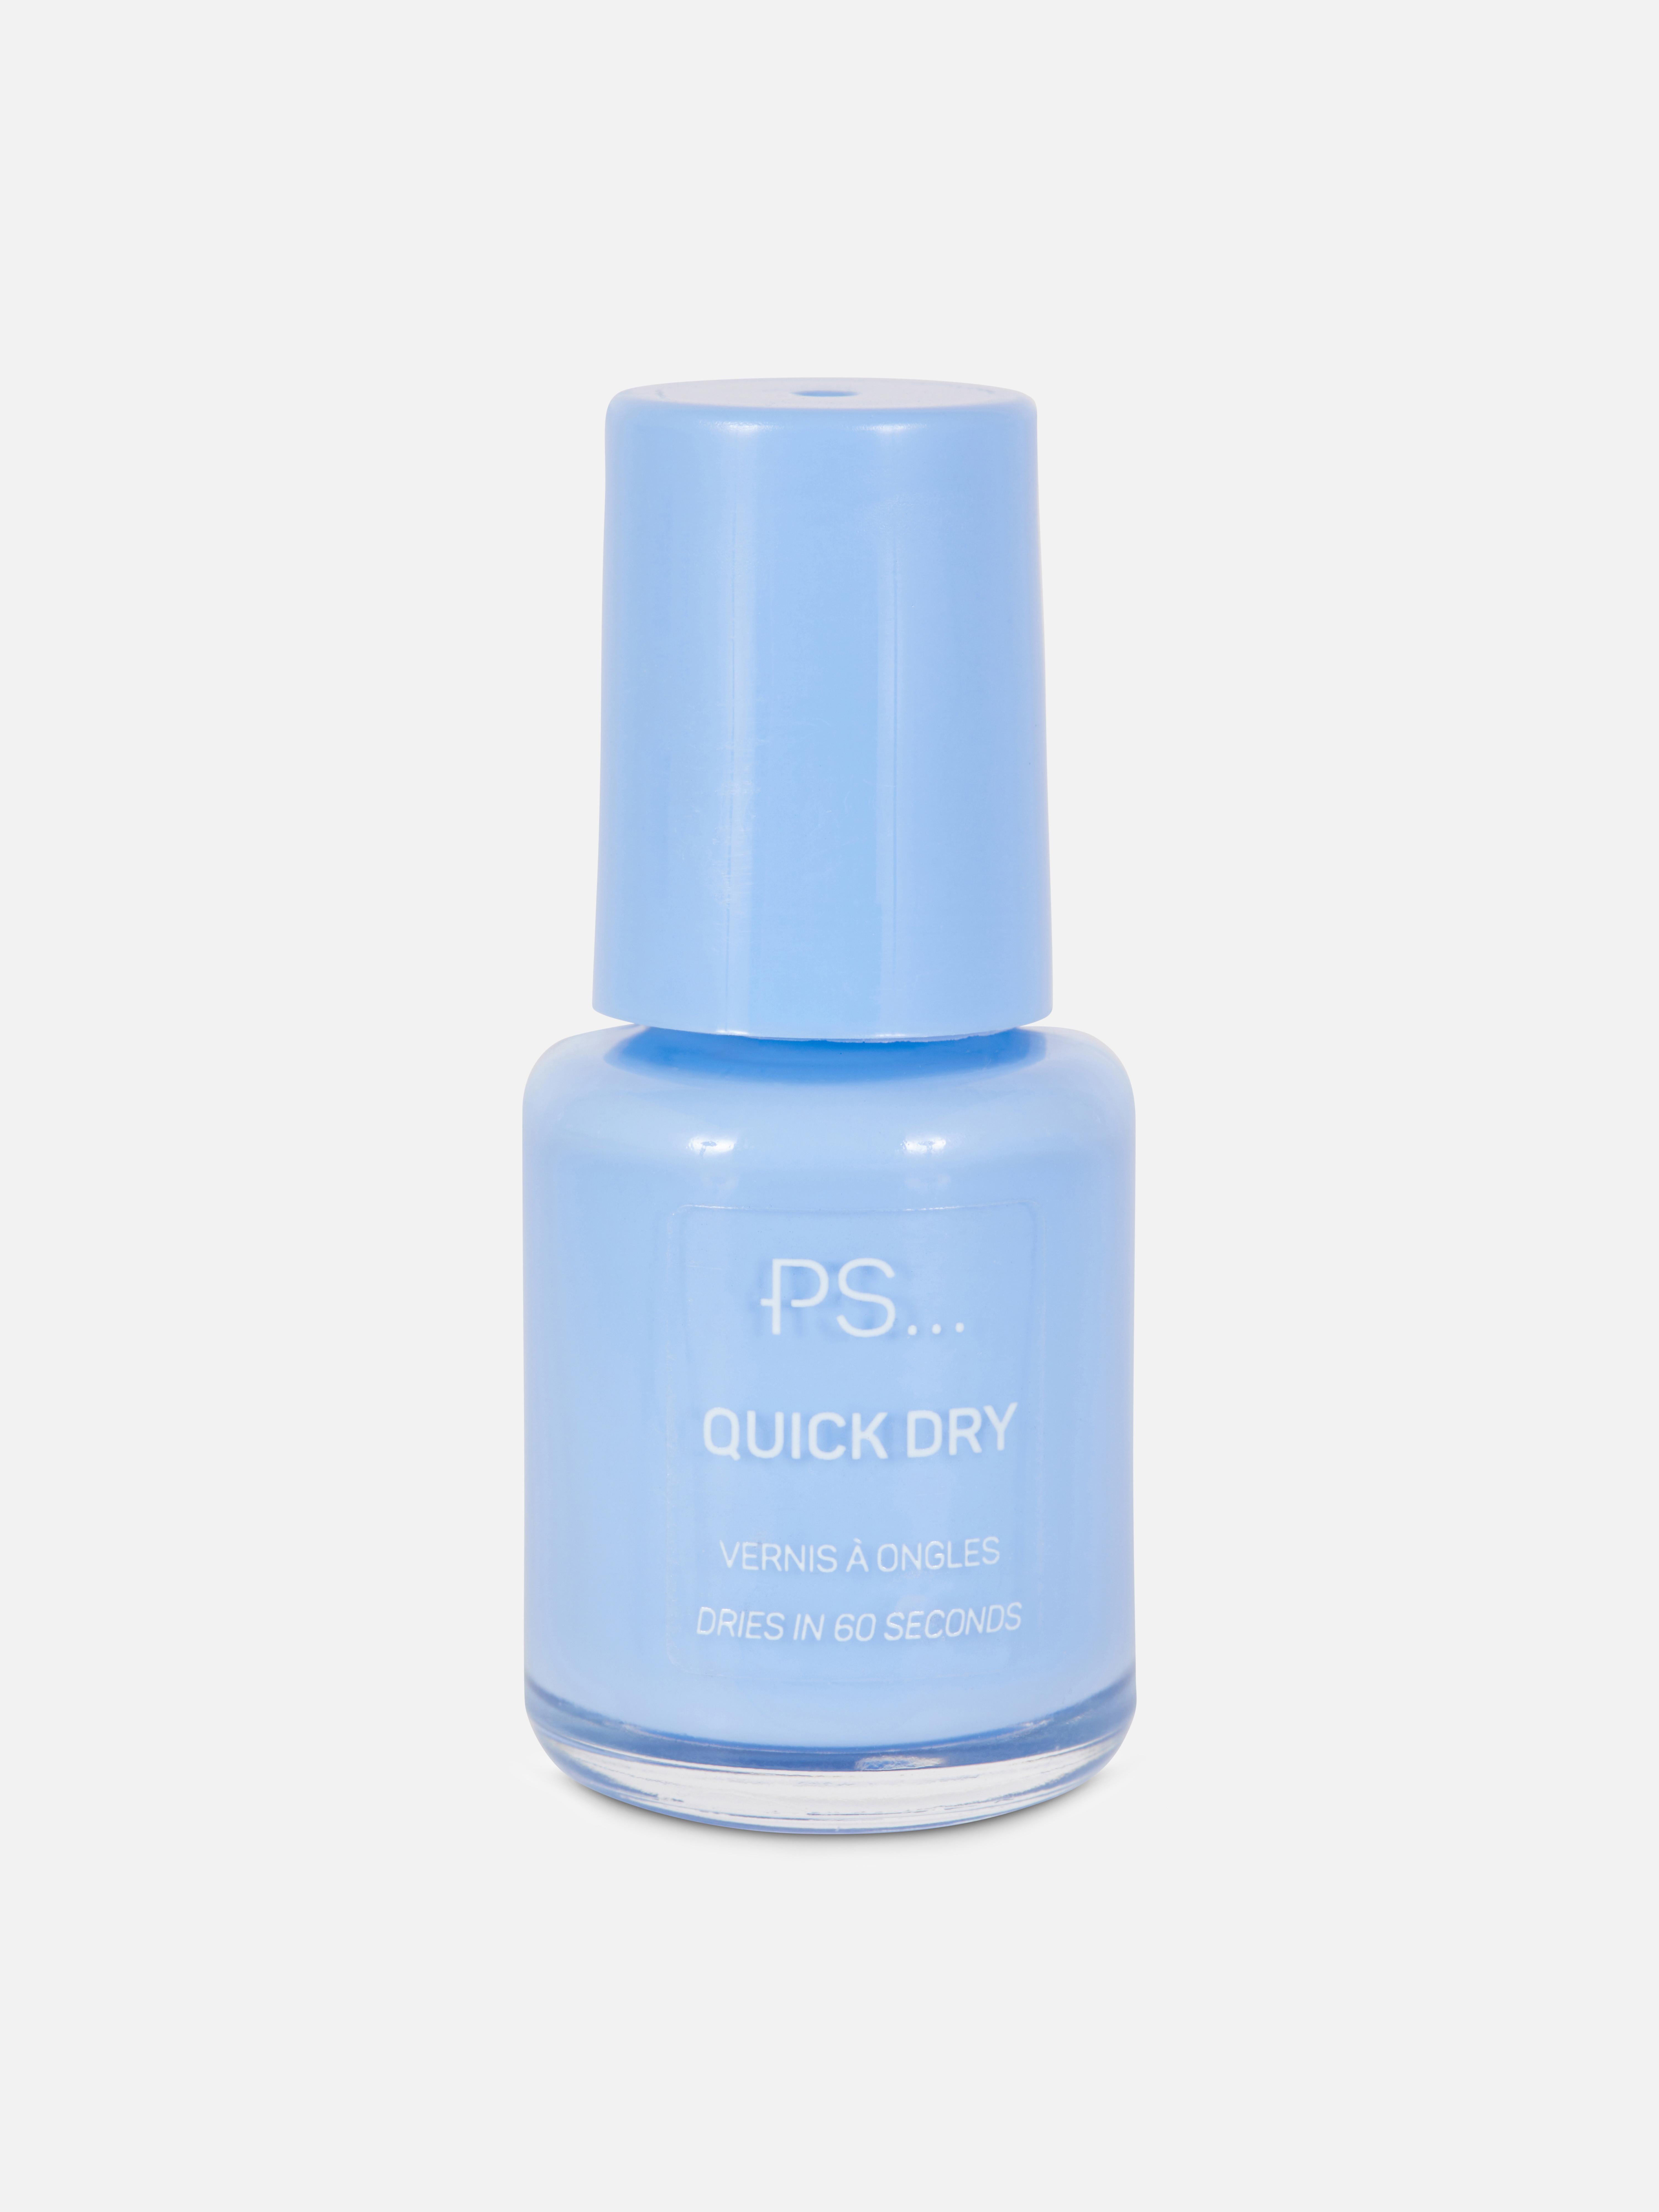 Primark PS Quick Dry Nail Polish review - Rachael Divers